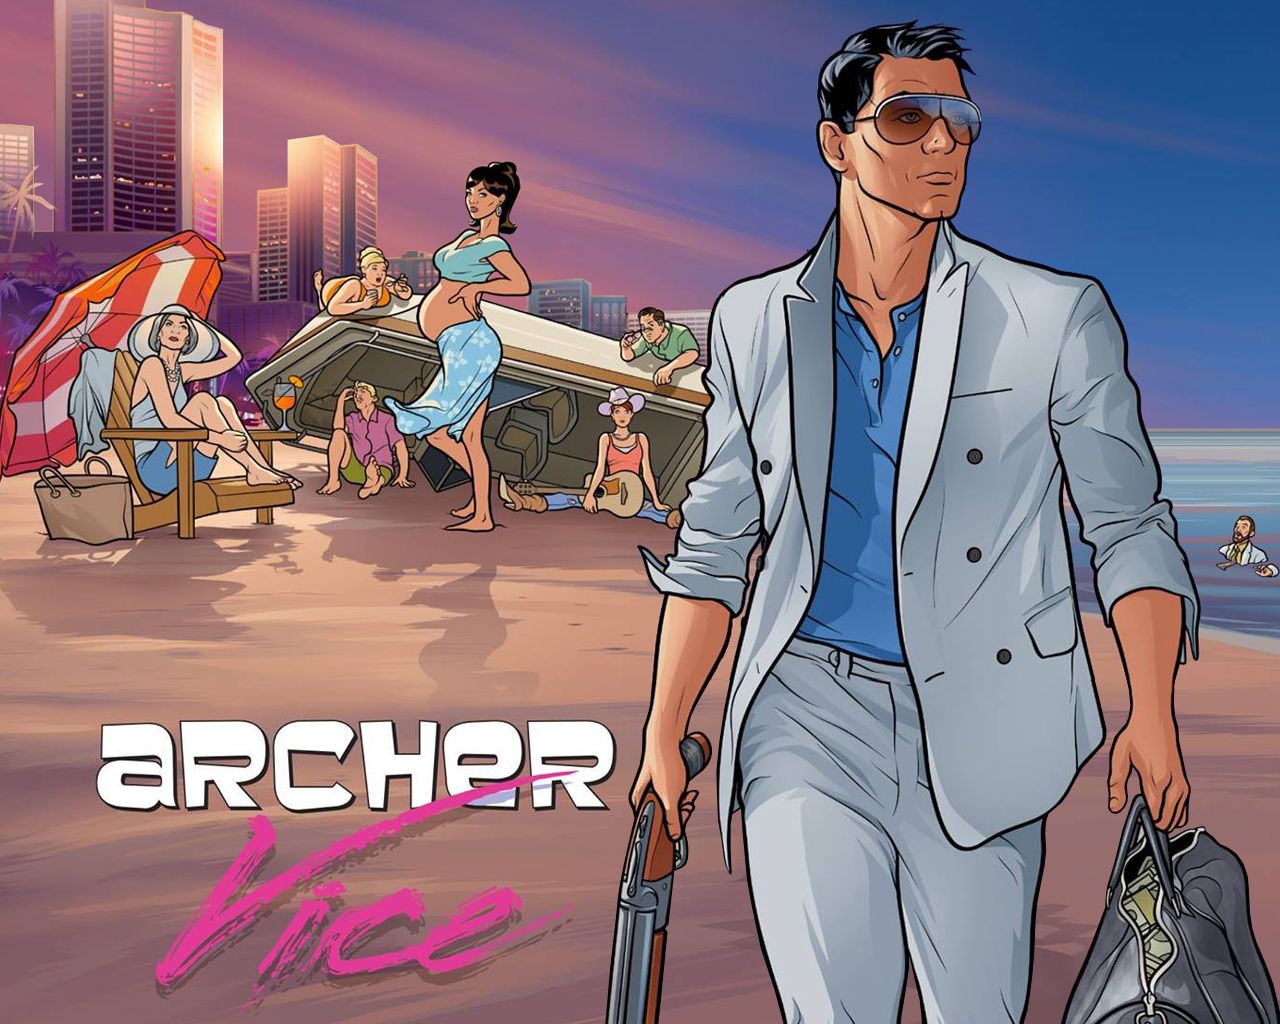 Archer will be back for THREE more seasons